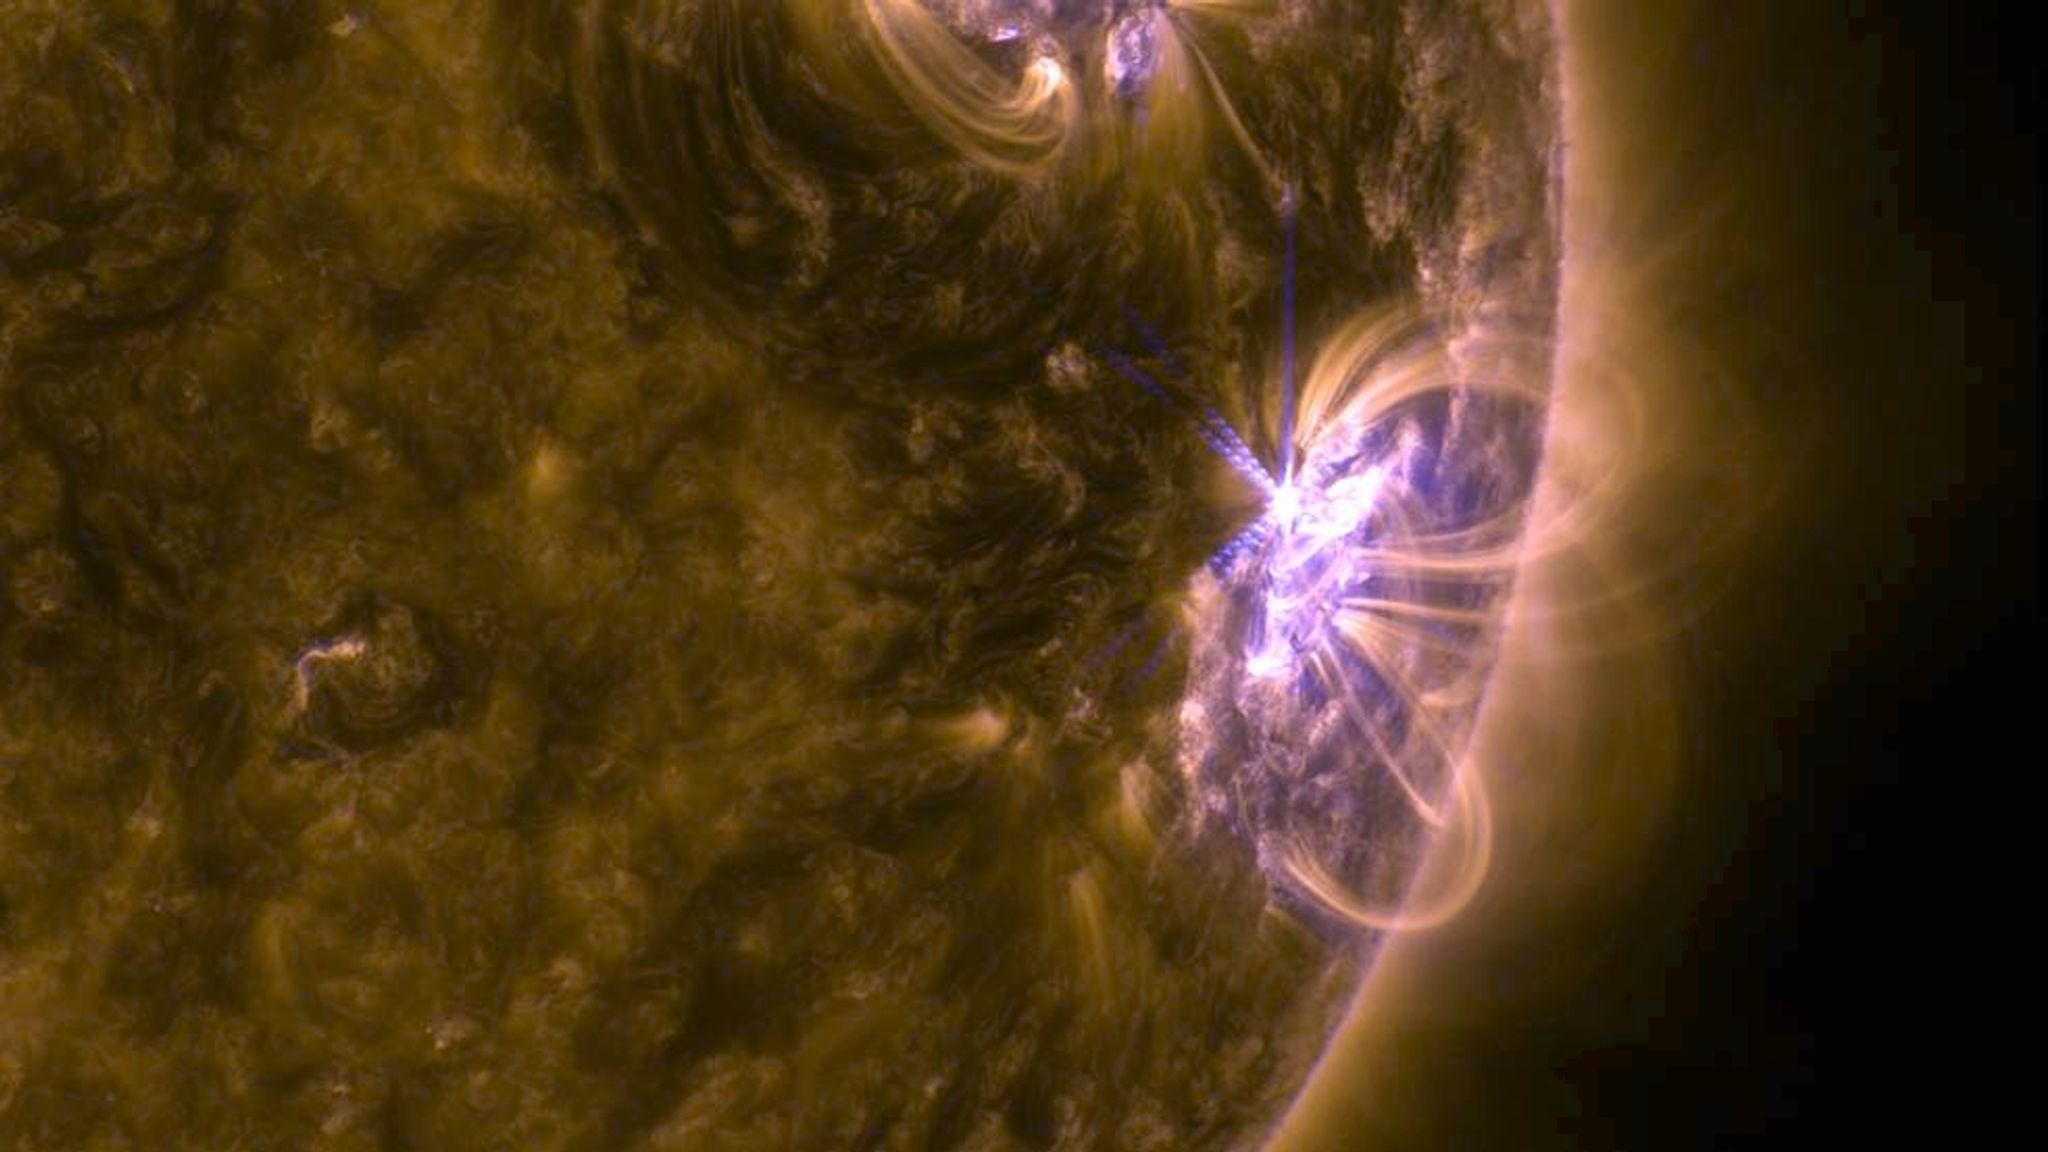 storm warning issued after 17 solar flares erupt from